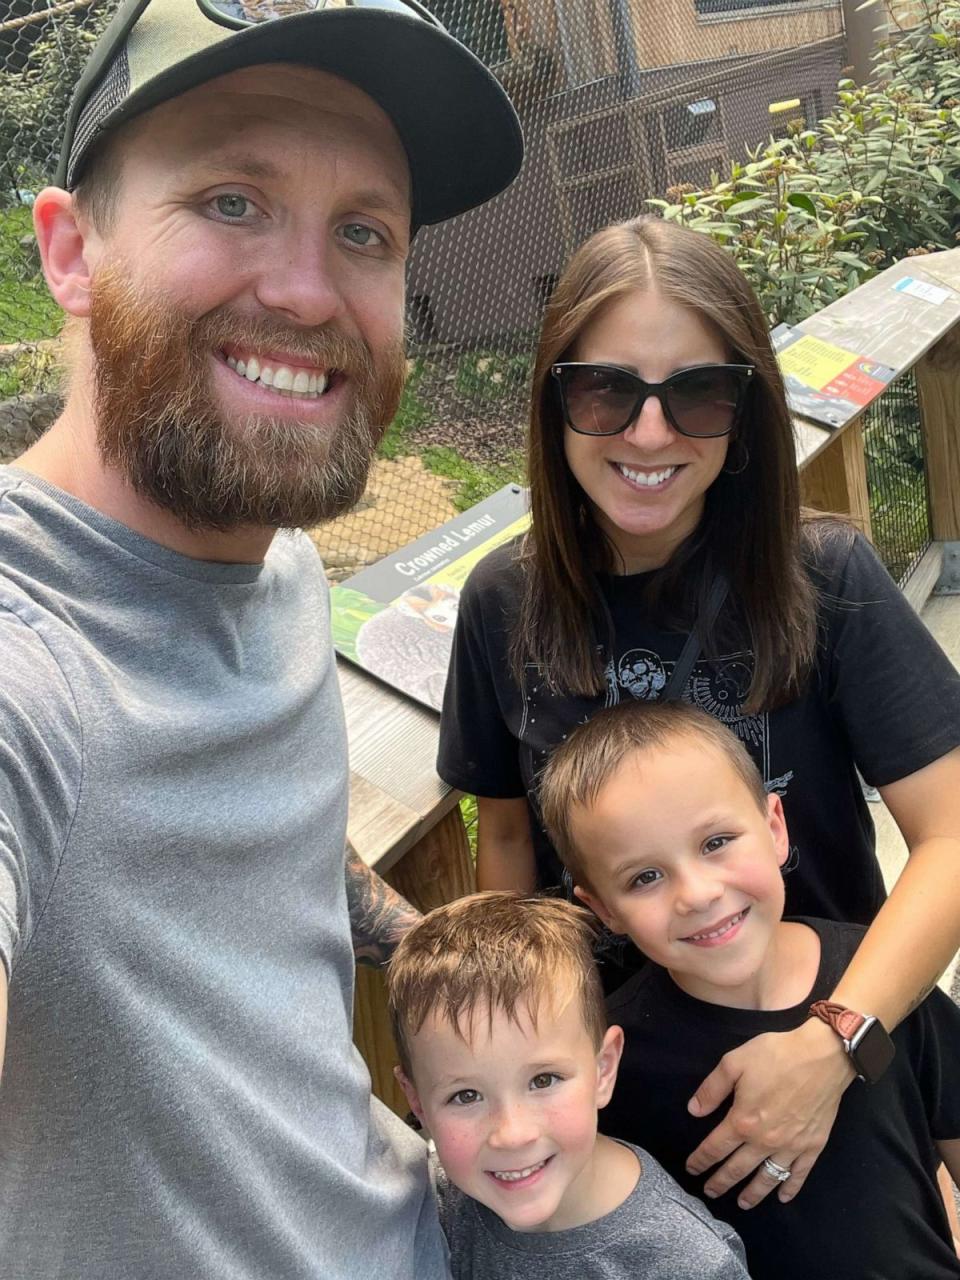 PHOTO: Tyler Lobdell and his wife Hailey are seen with their sons Hudson, 6, and Isaiah, 8. (Courtesy of Tyler Lobdell)